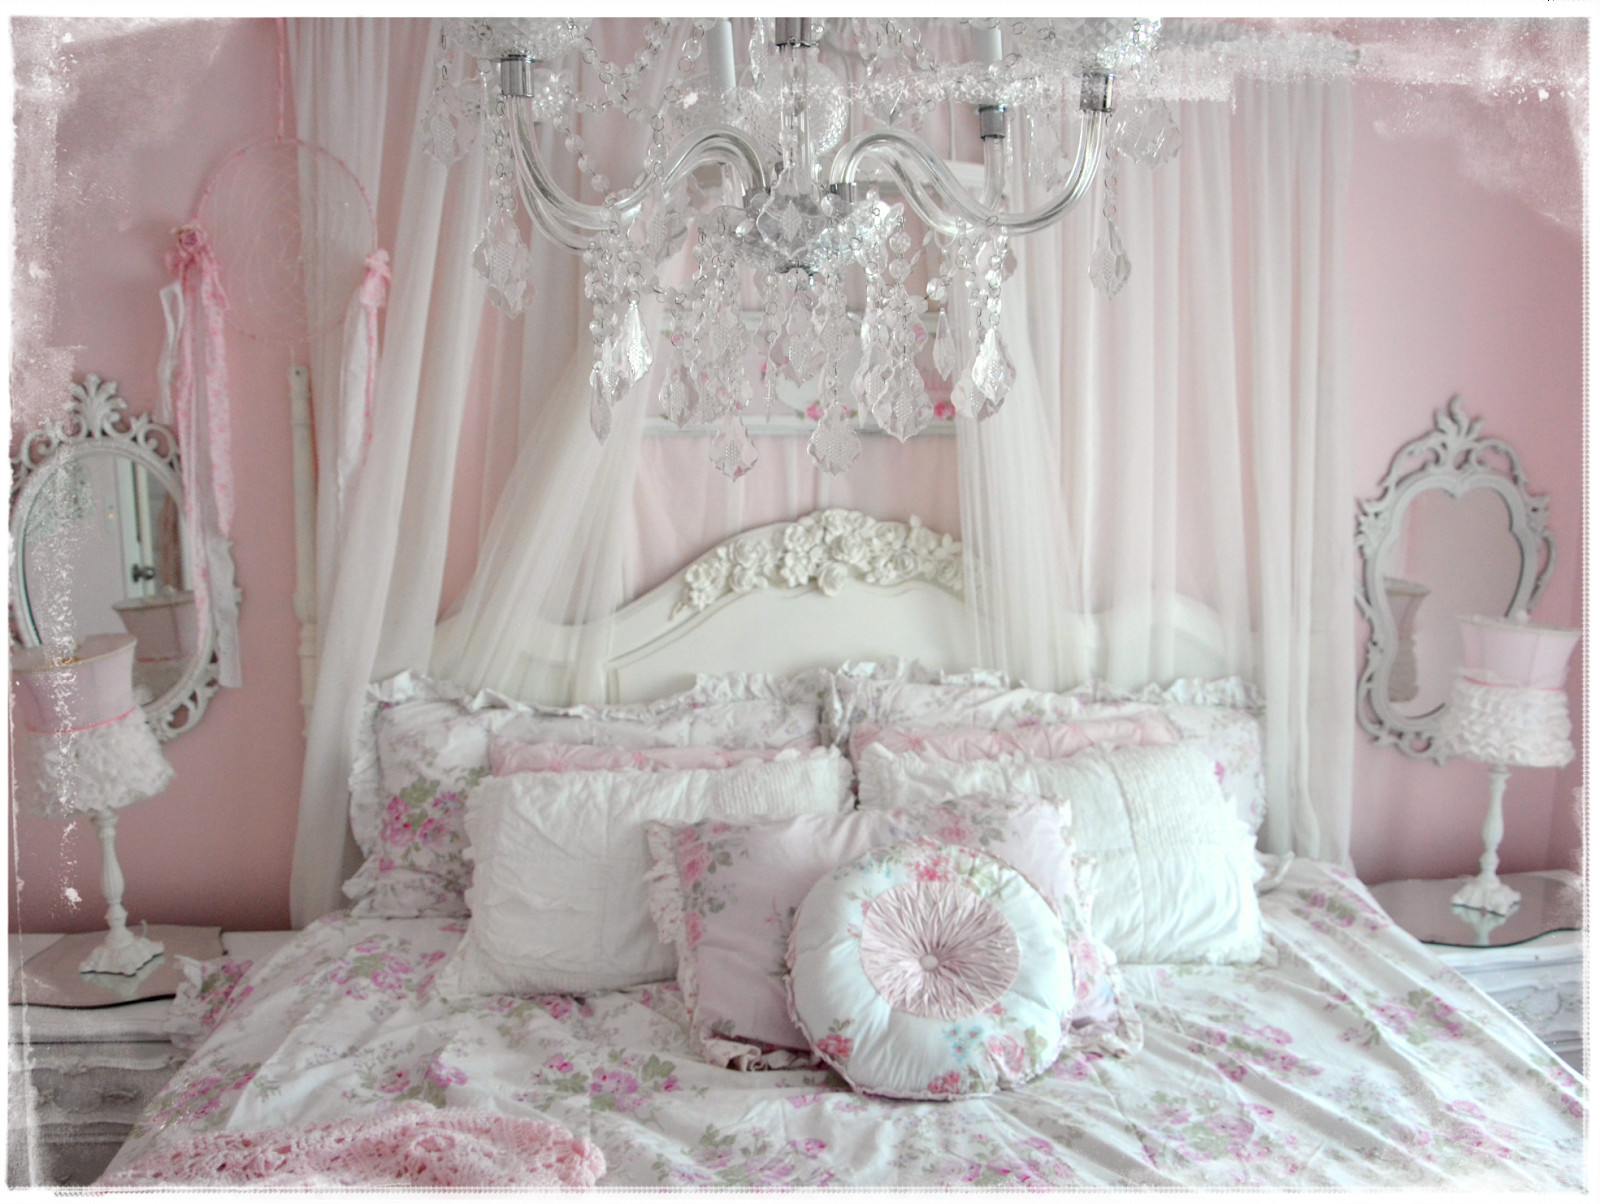 Images Of Shabby Chic Bedrooms
 Not So Shabby Shabby Chic New Simply Shabby Chic Bedding